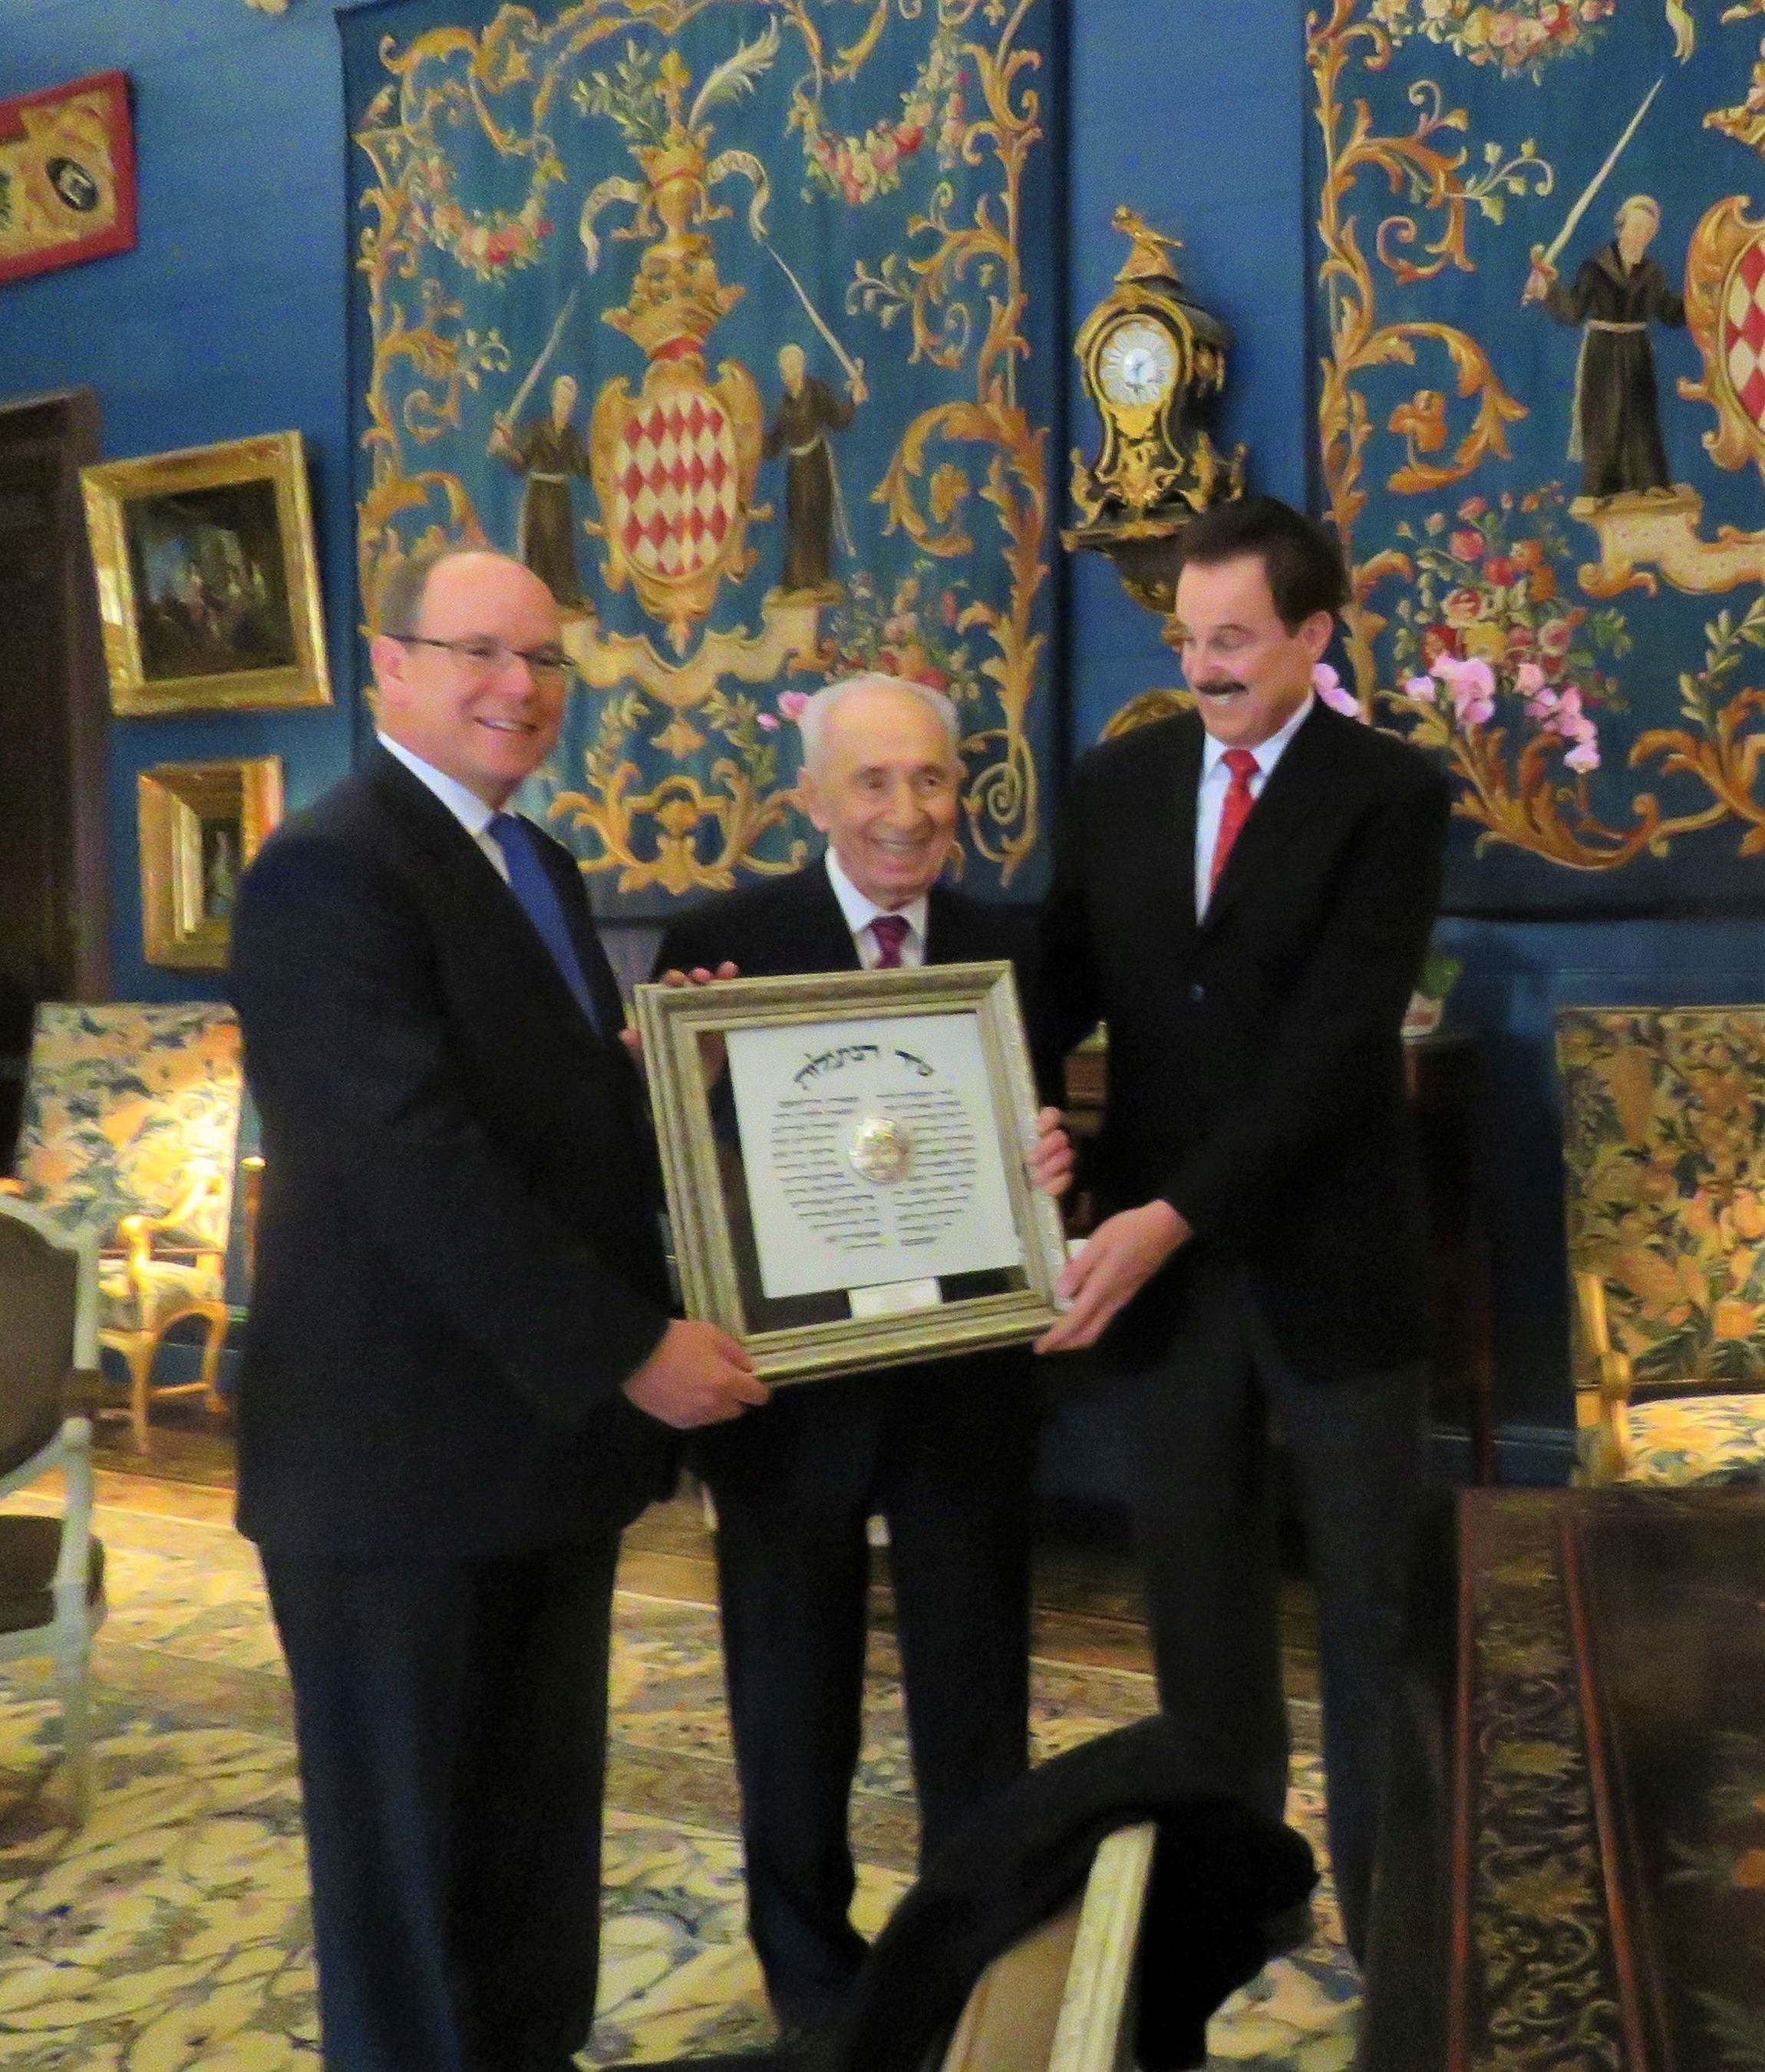 His Serene Highness Prince Albert II, Crowne Prince of Monaco, receiving the Friend of Zion Award from Israel's 9th President Shimon Peres and Dr. Mike Evans